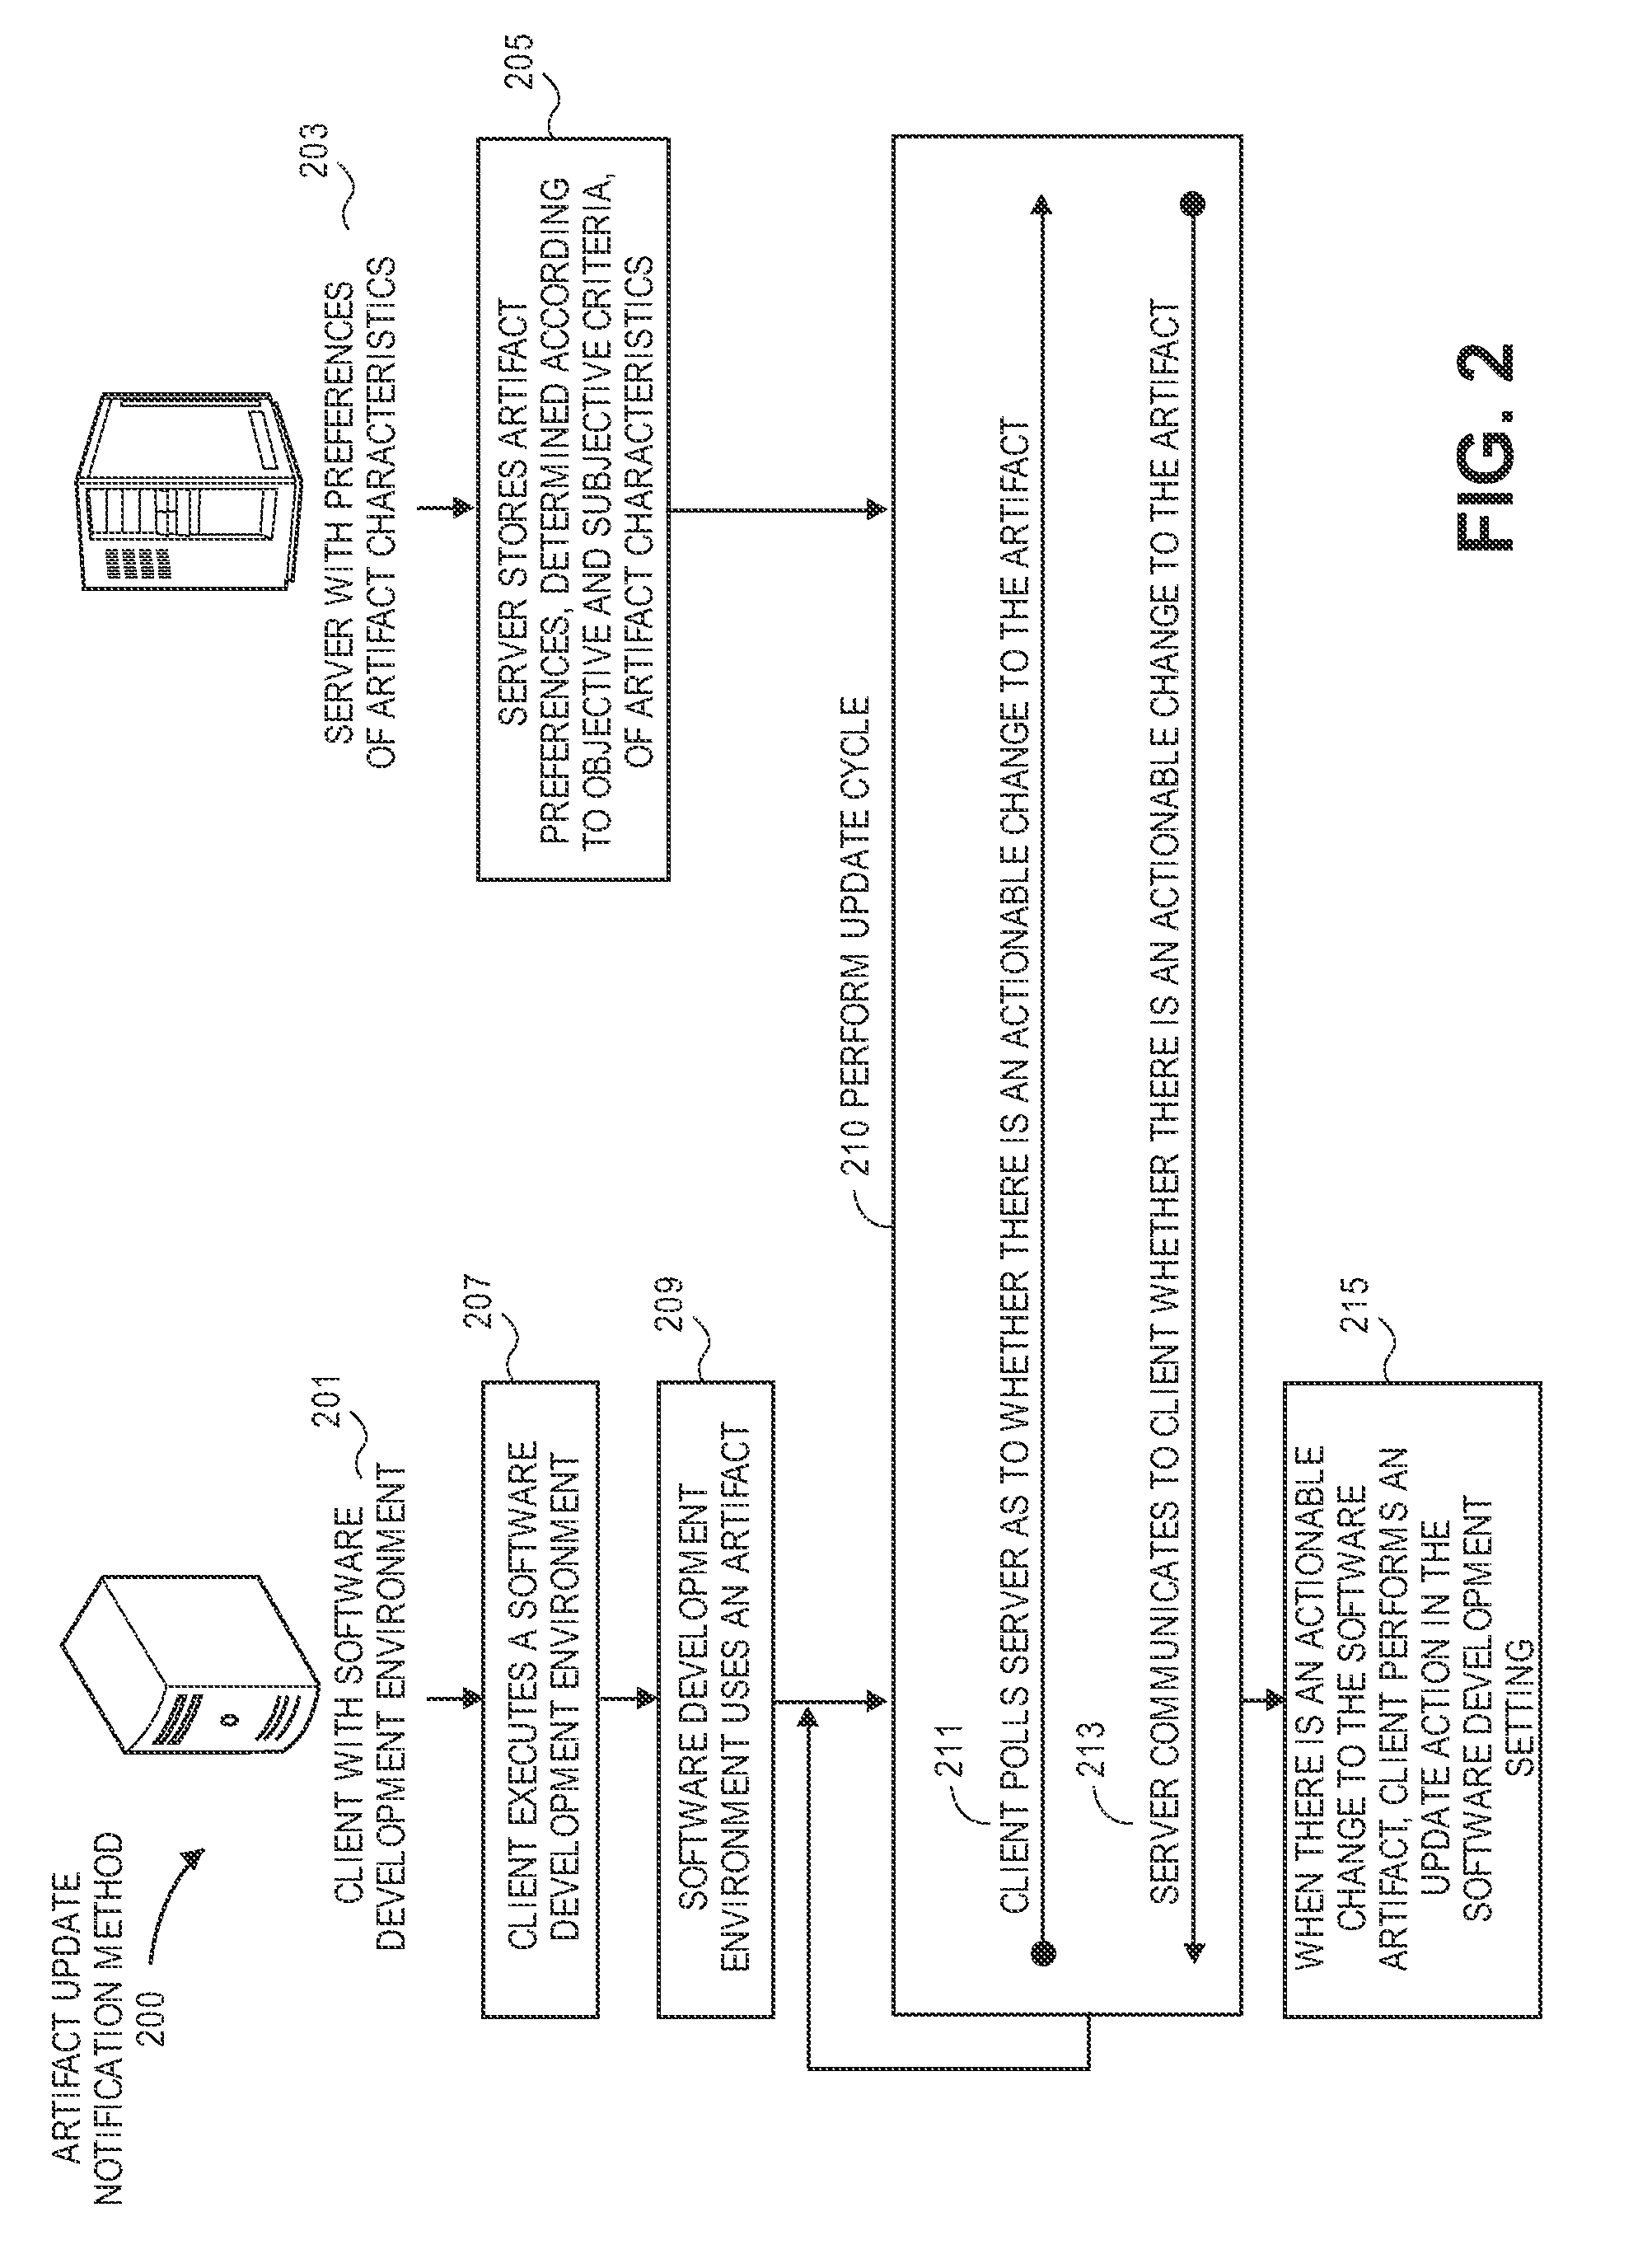 System and method of providing real-time updates related to in-use artifacts in a software development environment